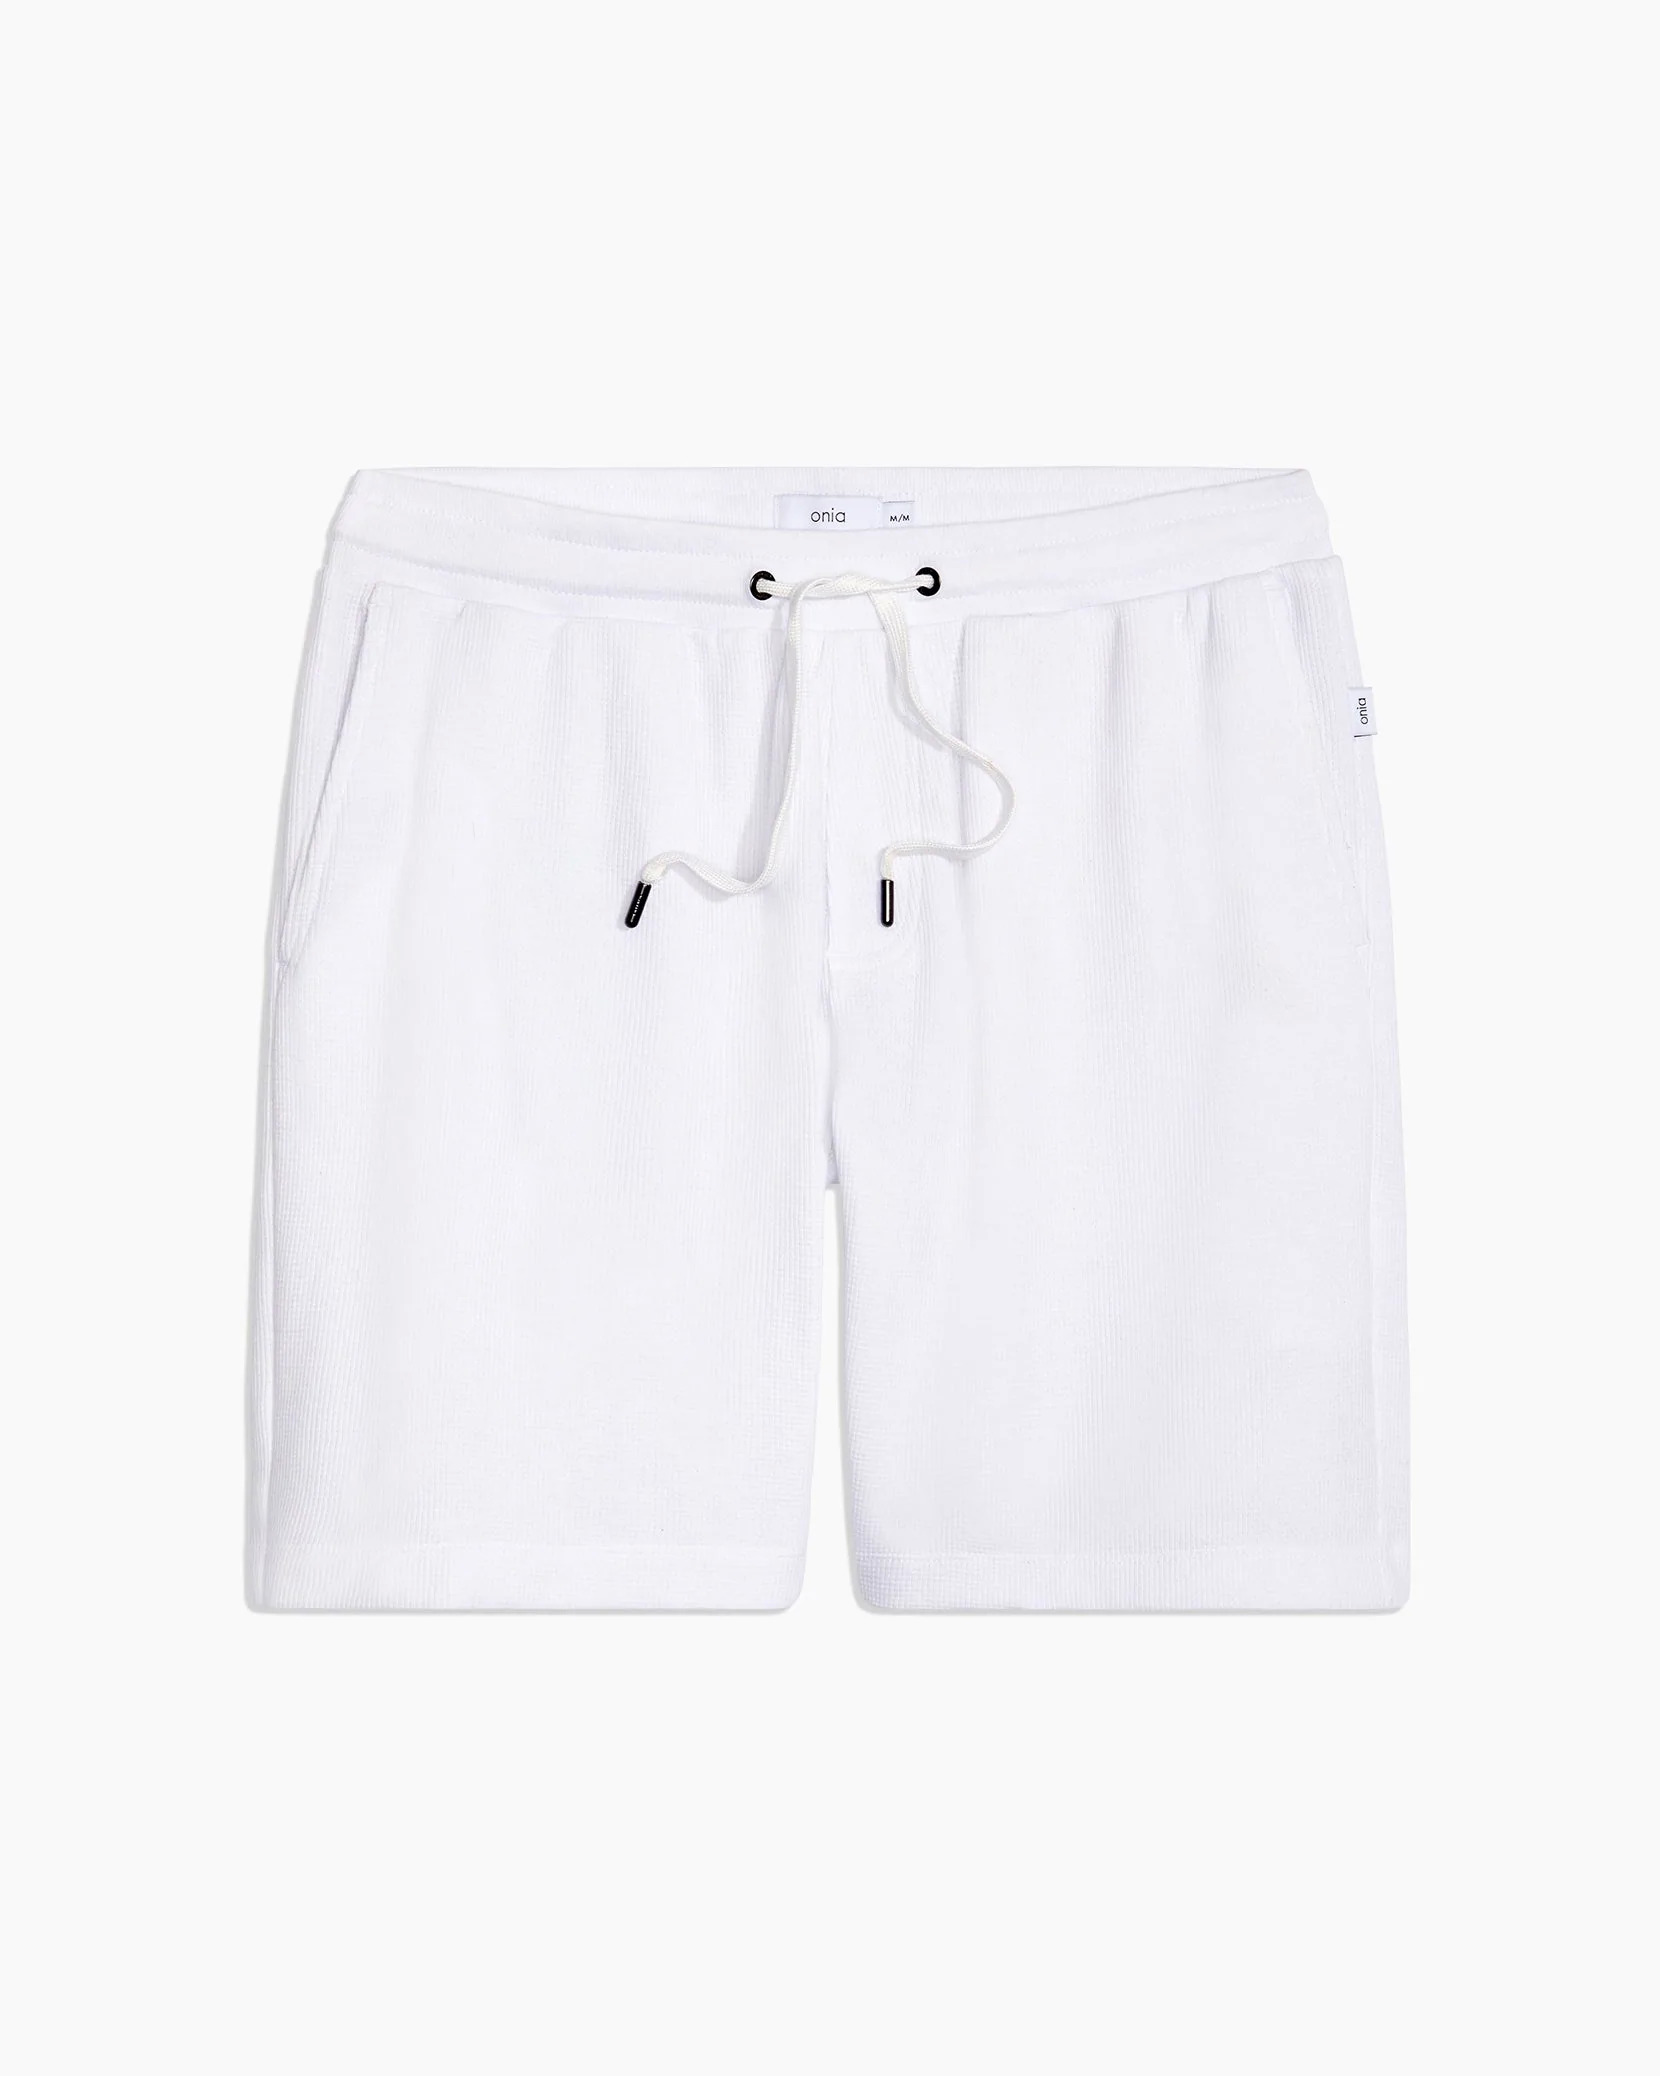 80% OFF Onia Sample Sale - Waffle Knit Shorts Most Sizes Available $15